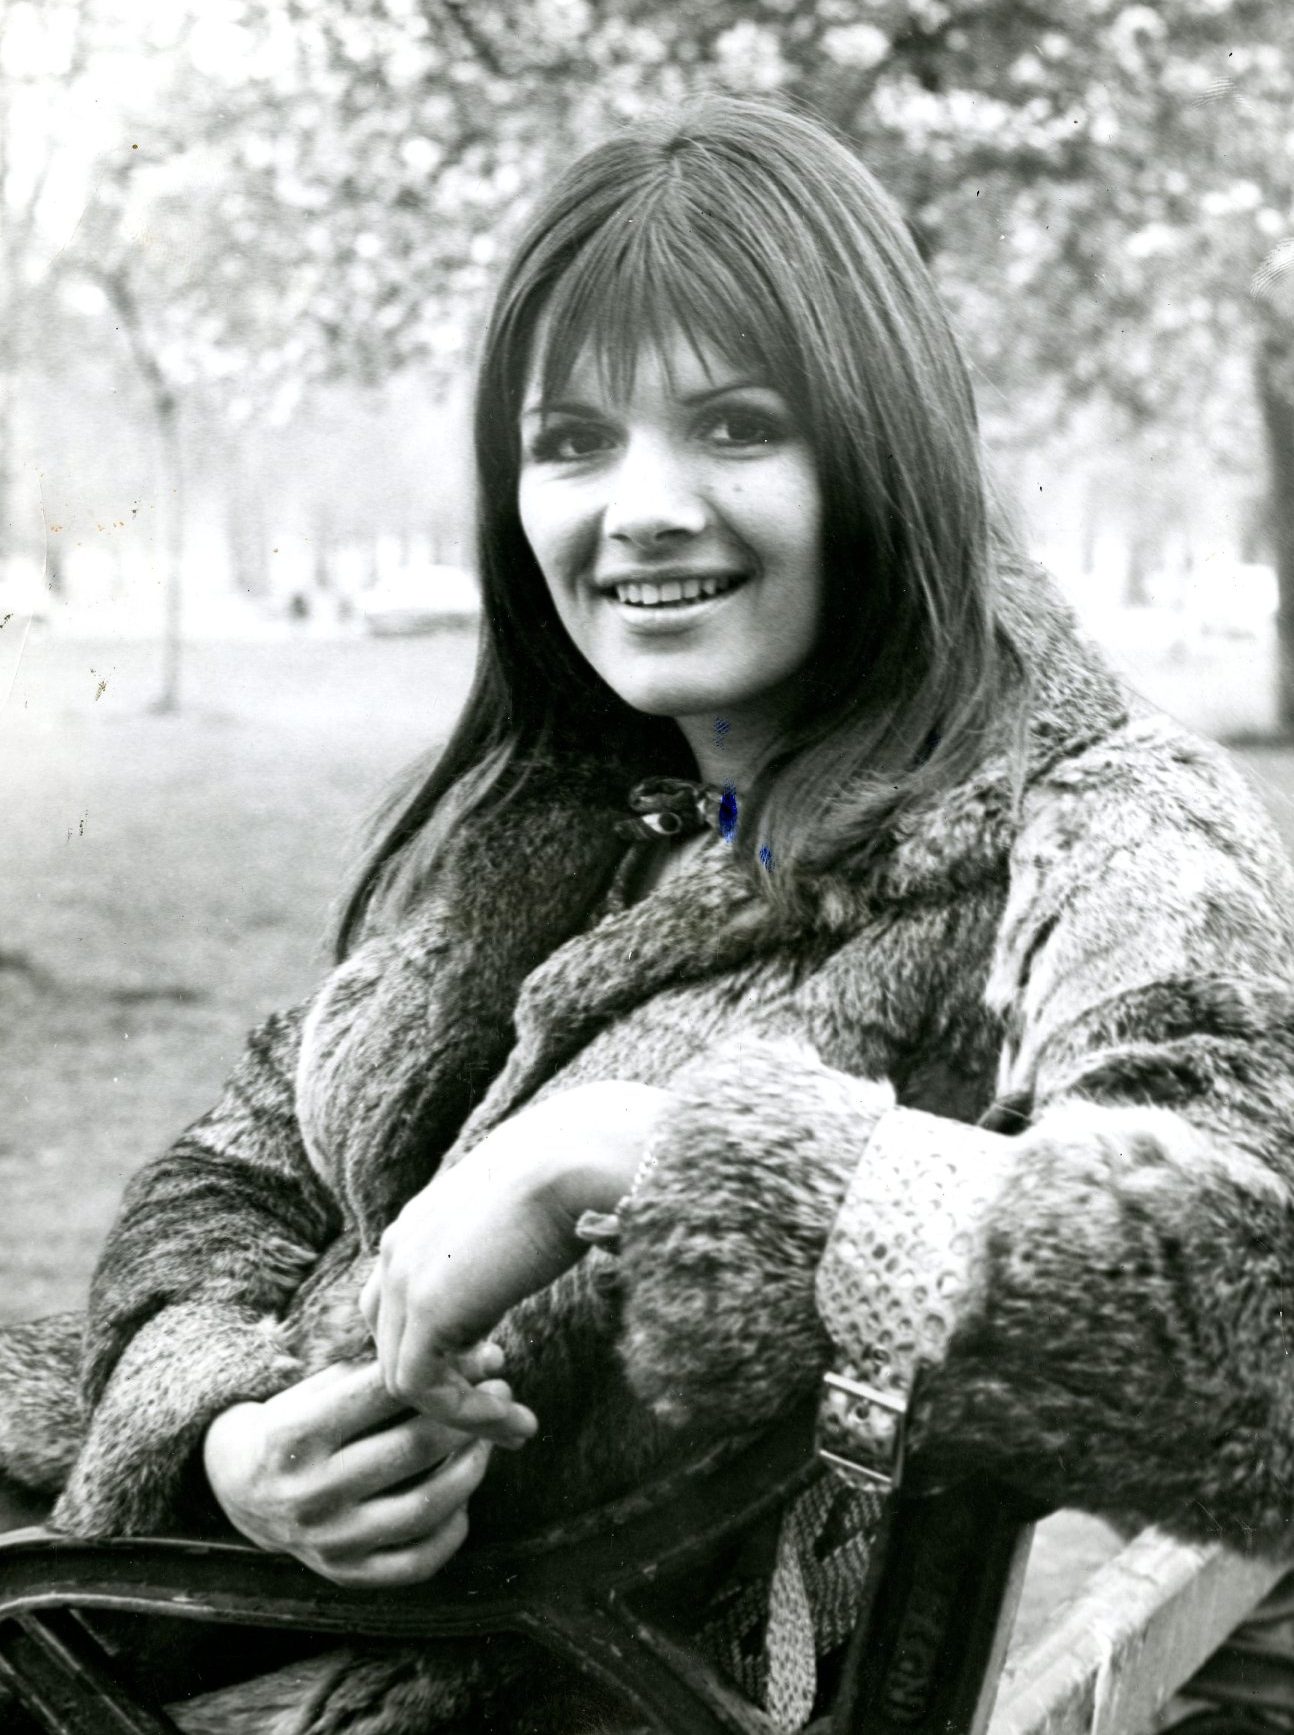 Eve Graham, in a fur coat on a park bench, in April 1971 during her time with the band.